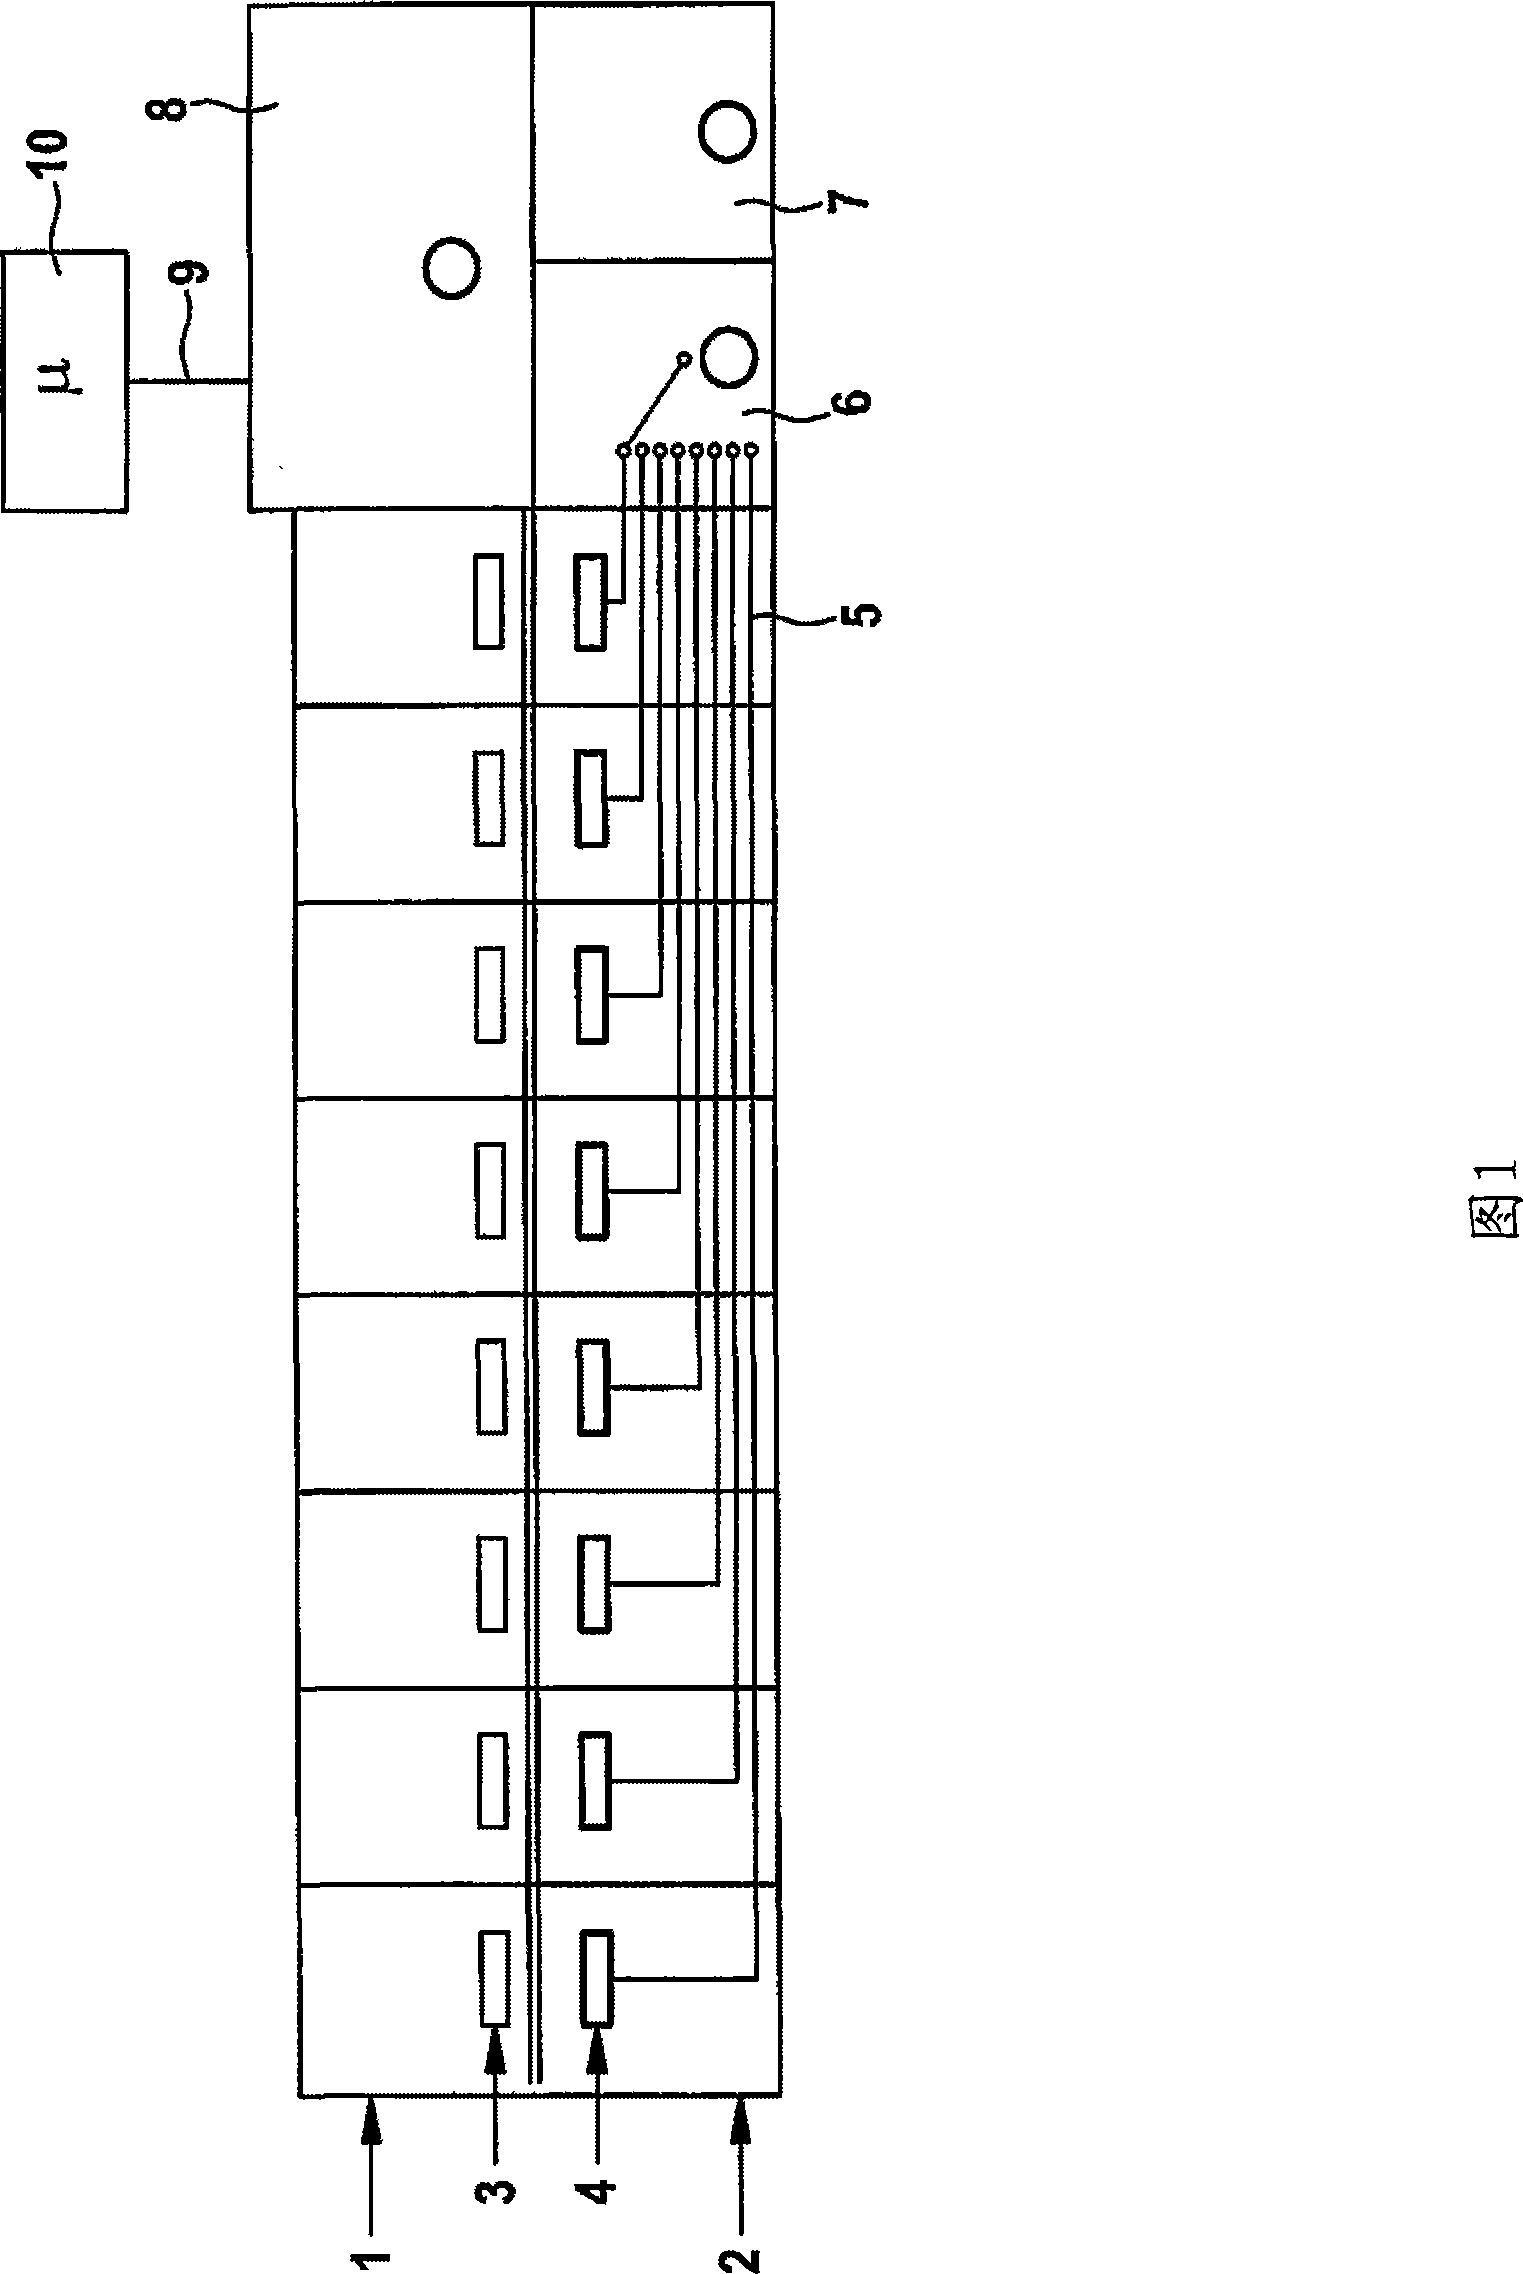 Valve unit with electronic valve recognition devices